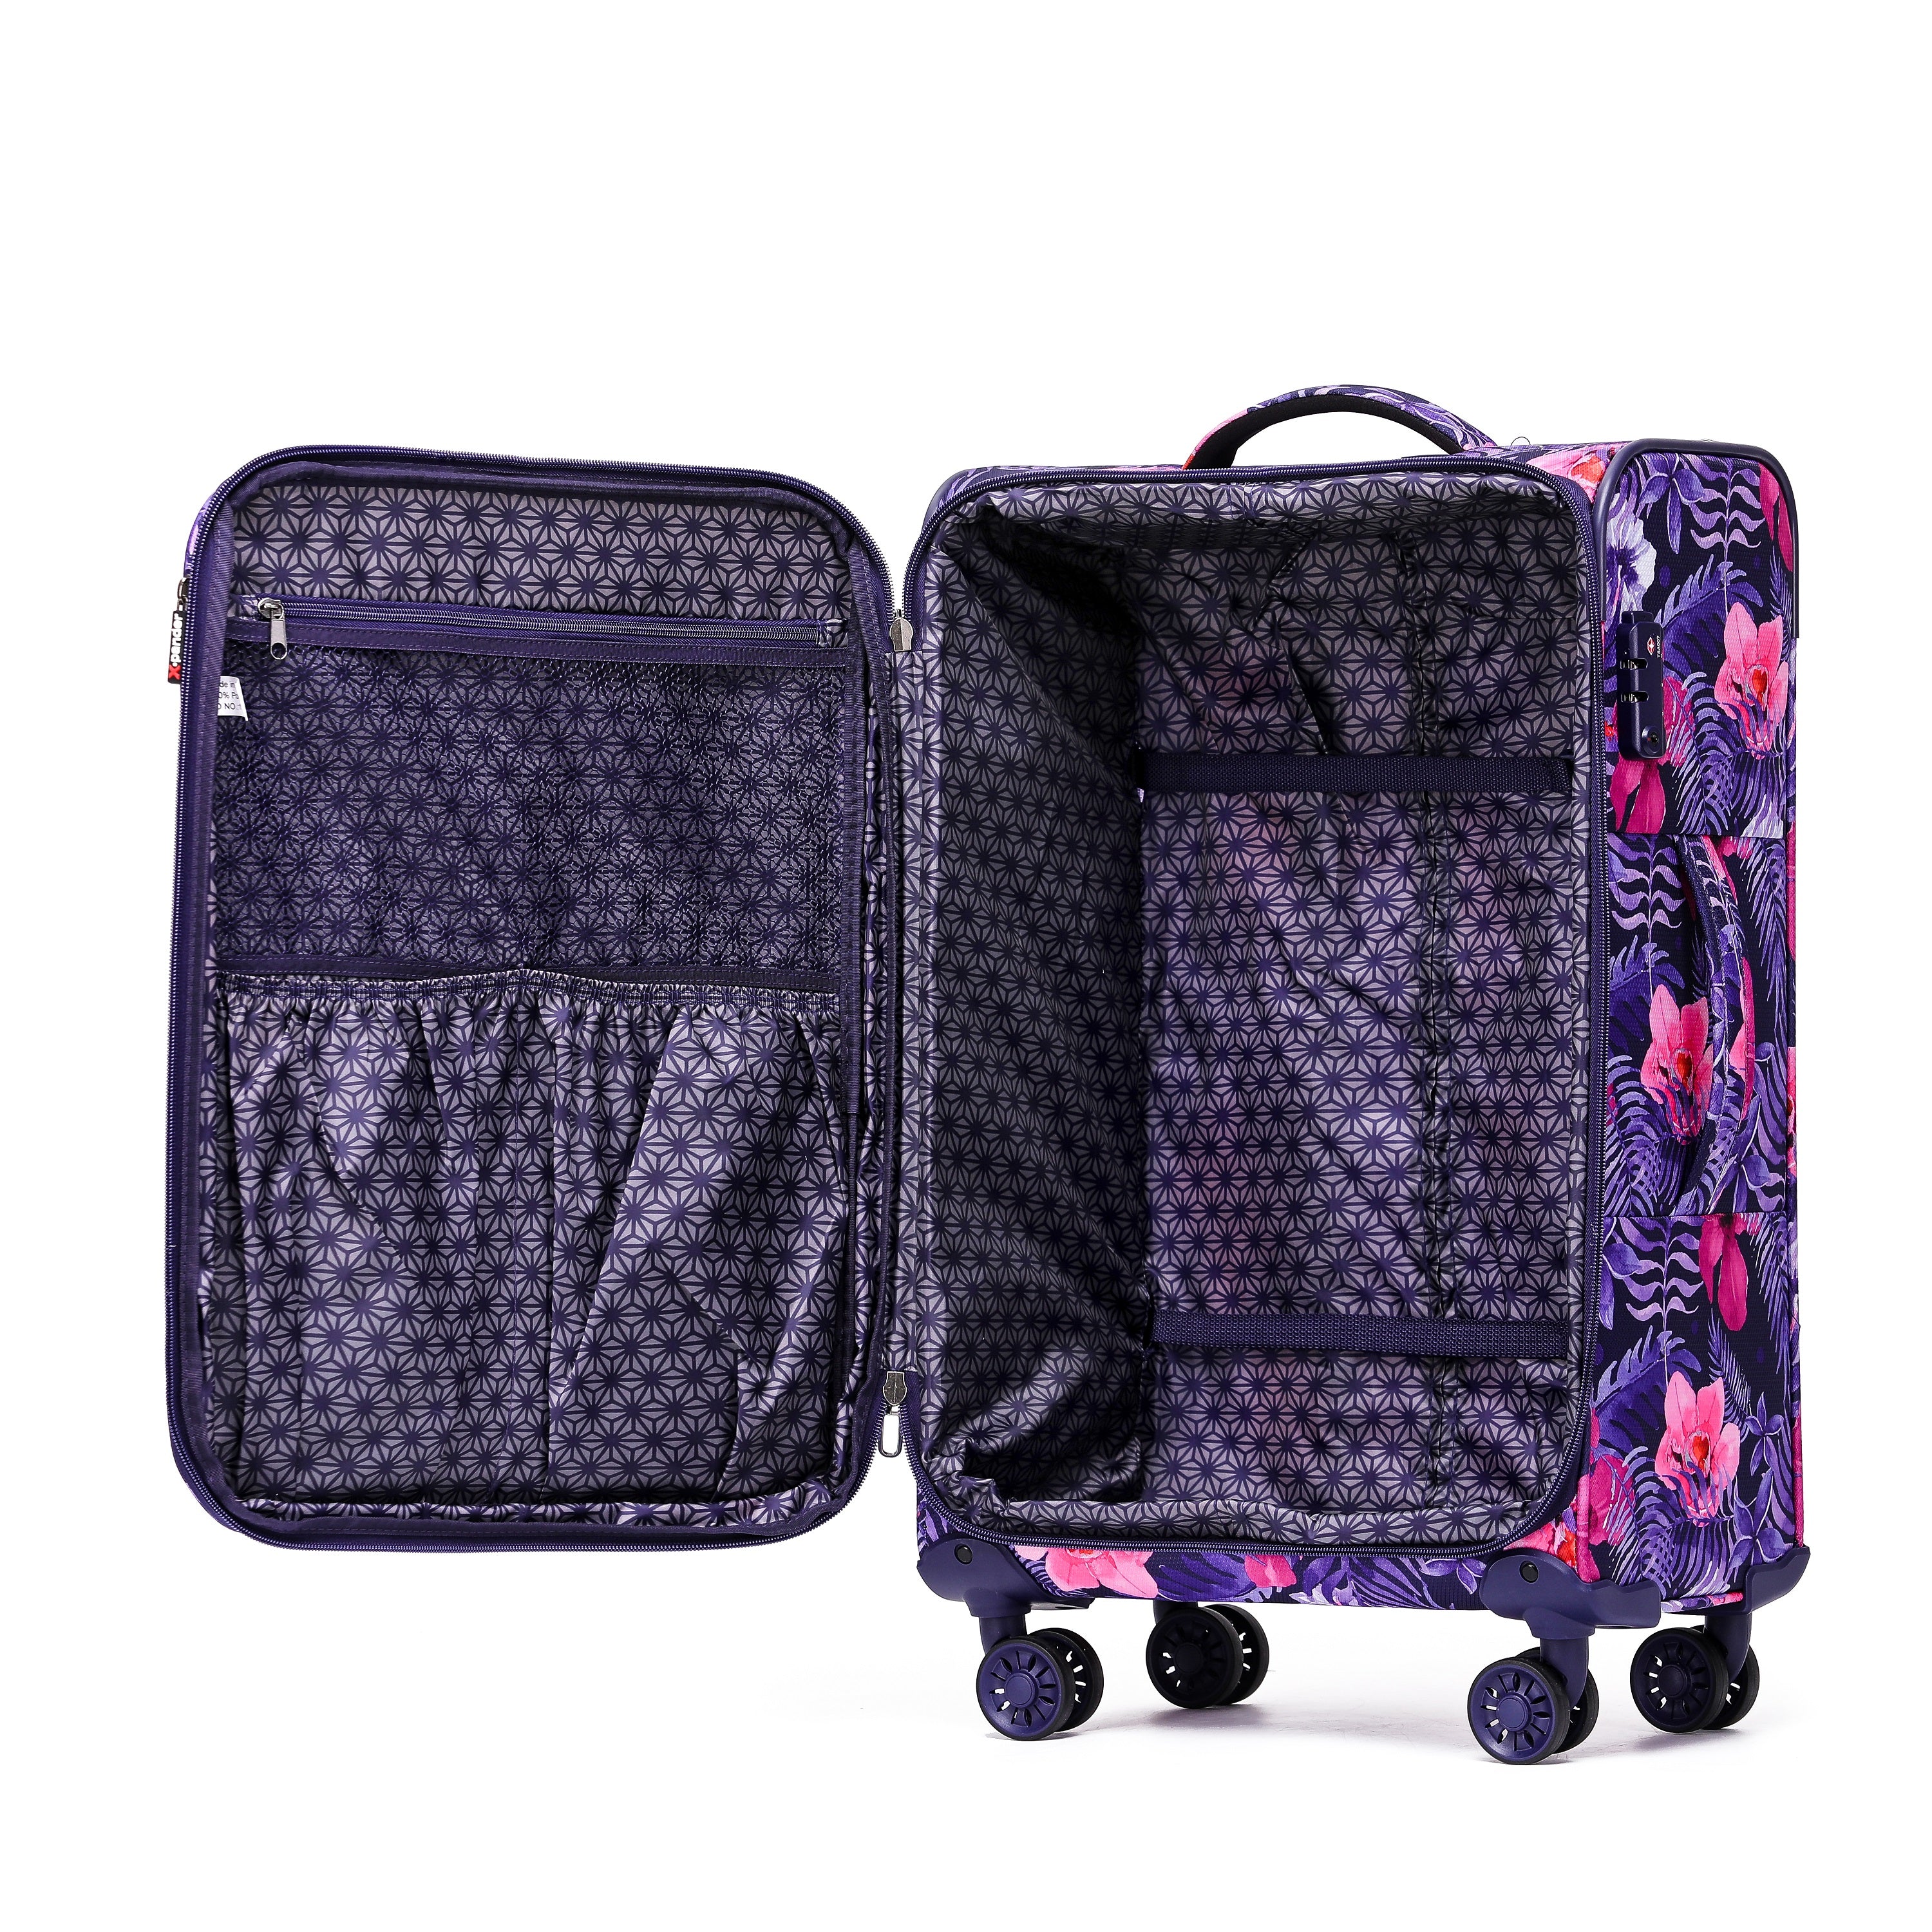 Tosca - So Lite 3.0 29in Large 4 Wheel Soft Suitcase - Flower - 0